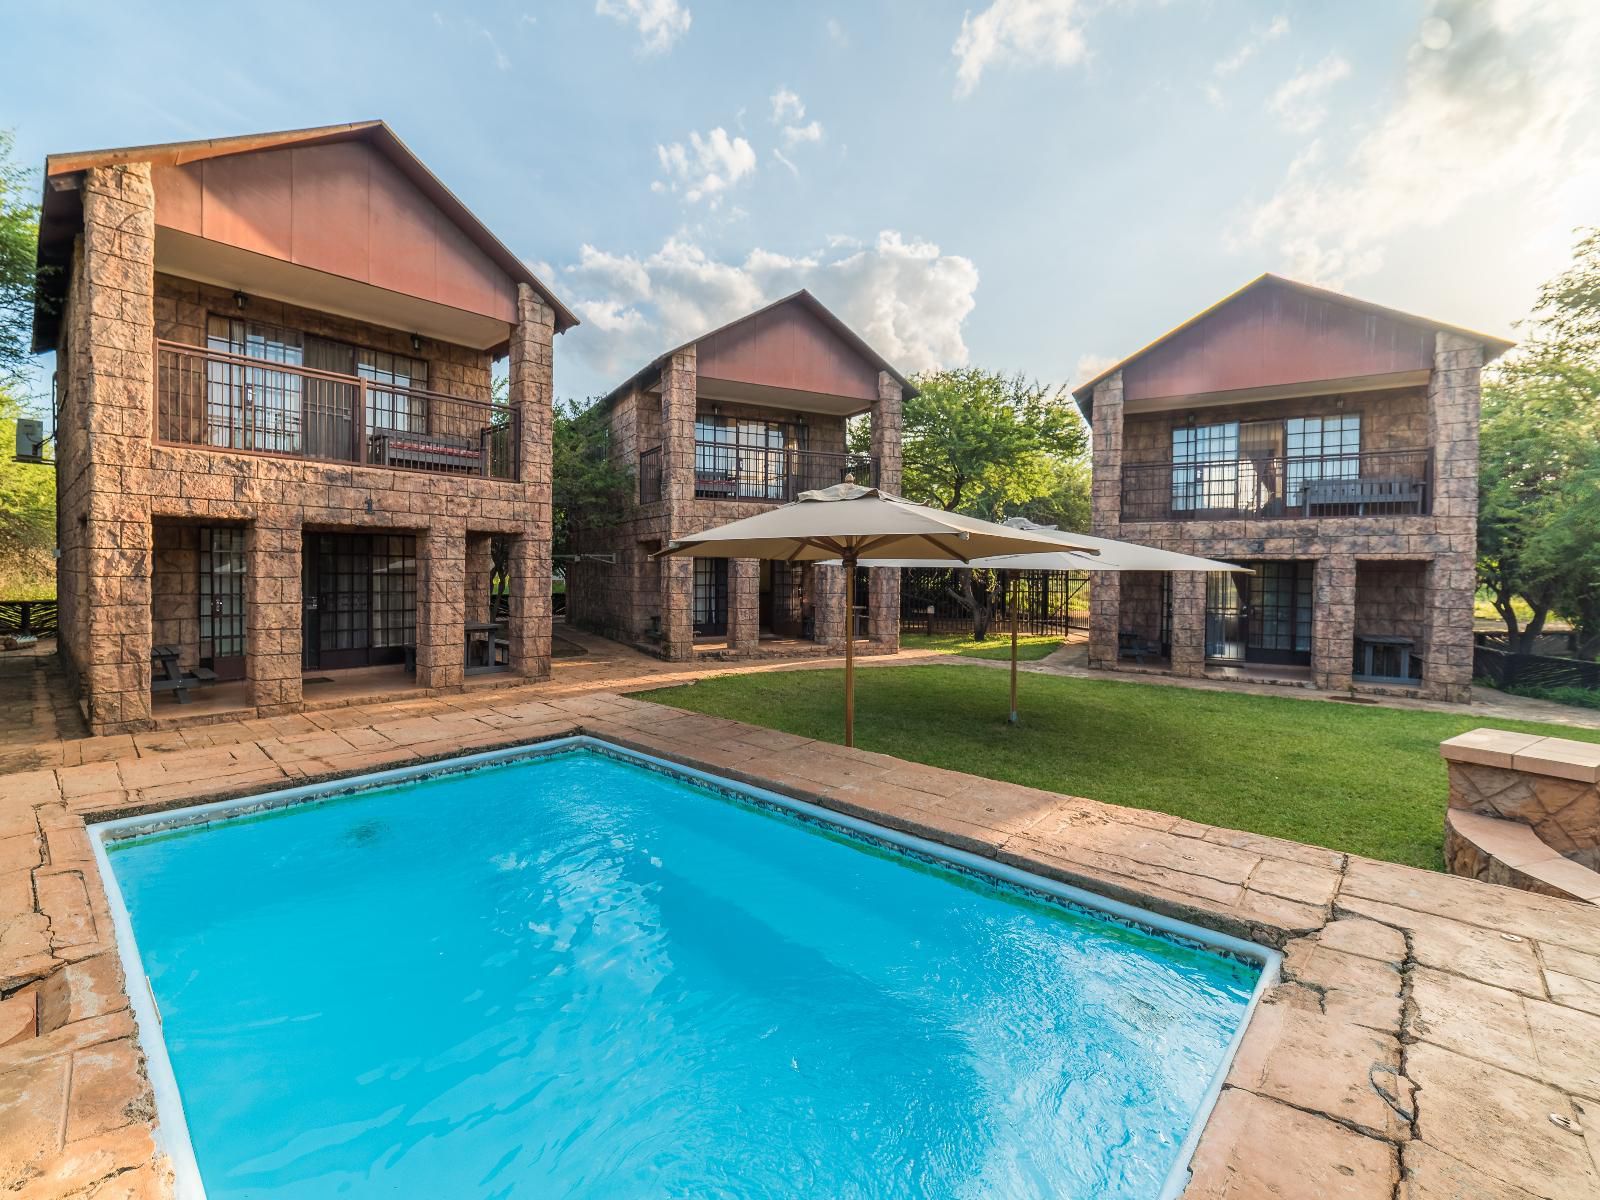 Twalumba Marloth Park Mpumalanga South Africa Complementary Colors, House, Building, Architecture, Swimming Pool